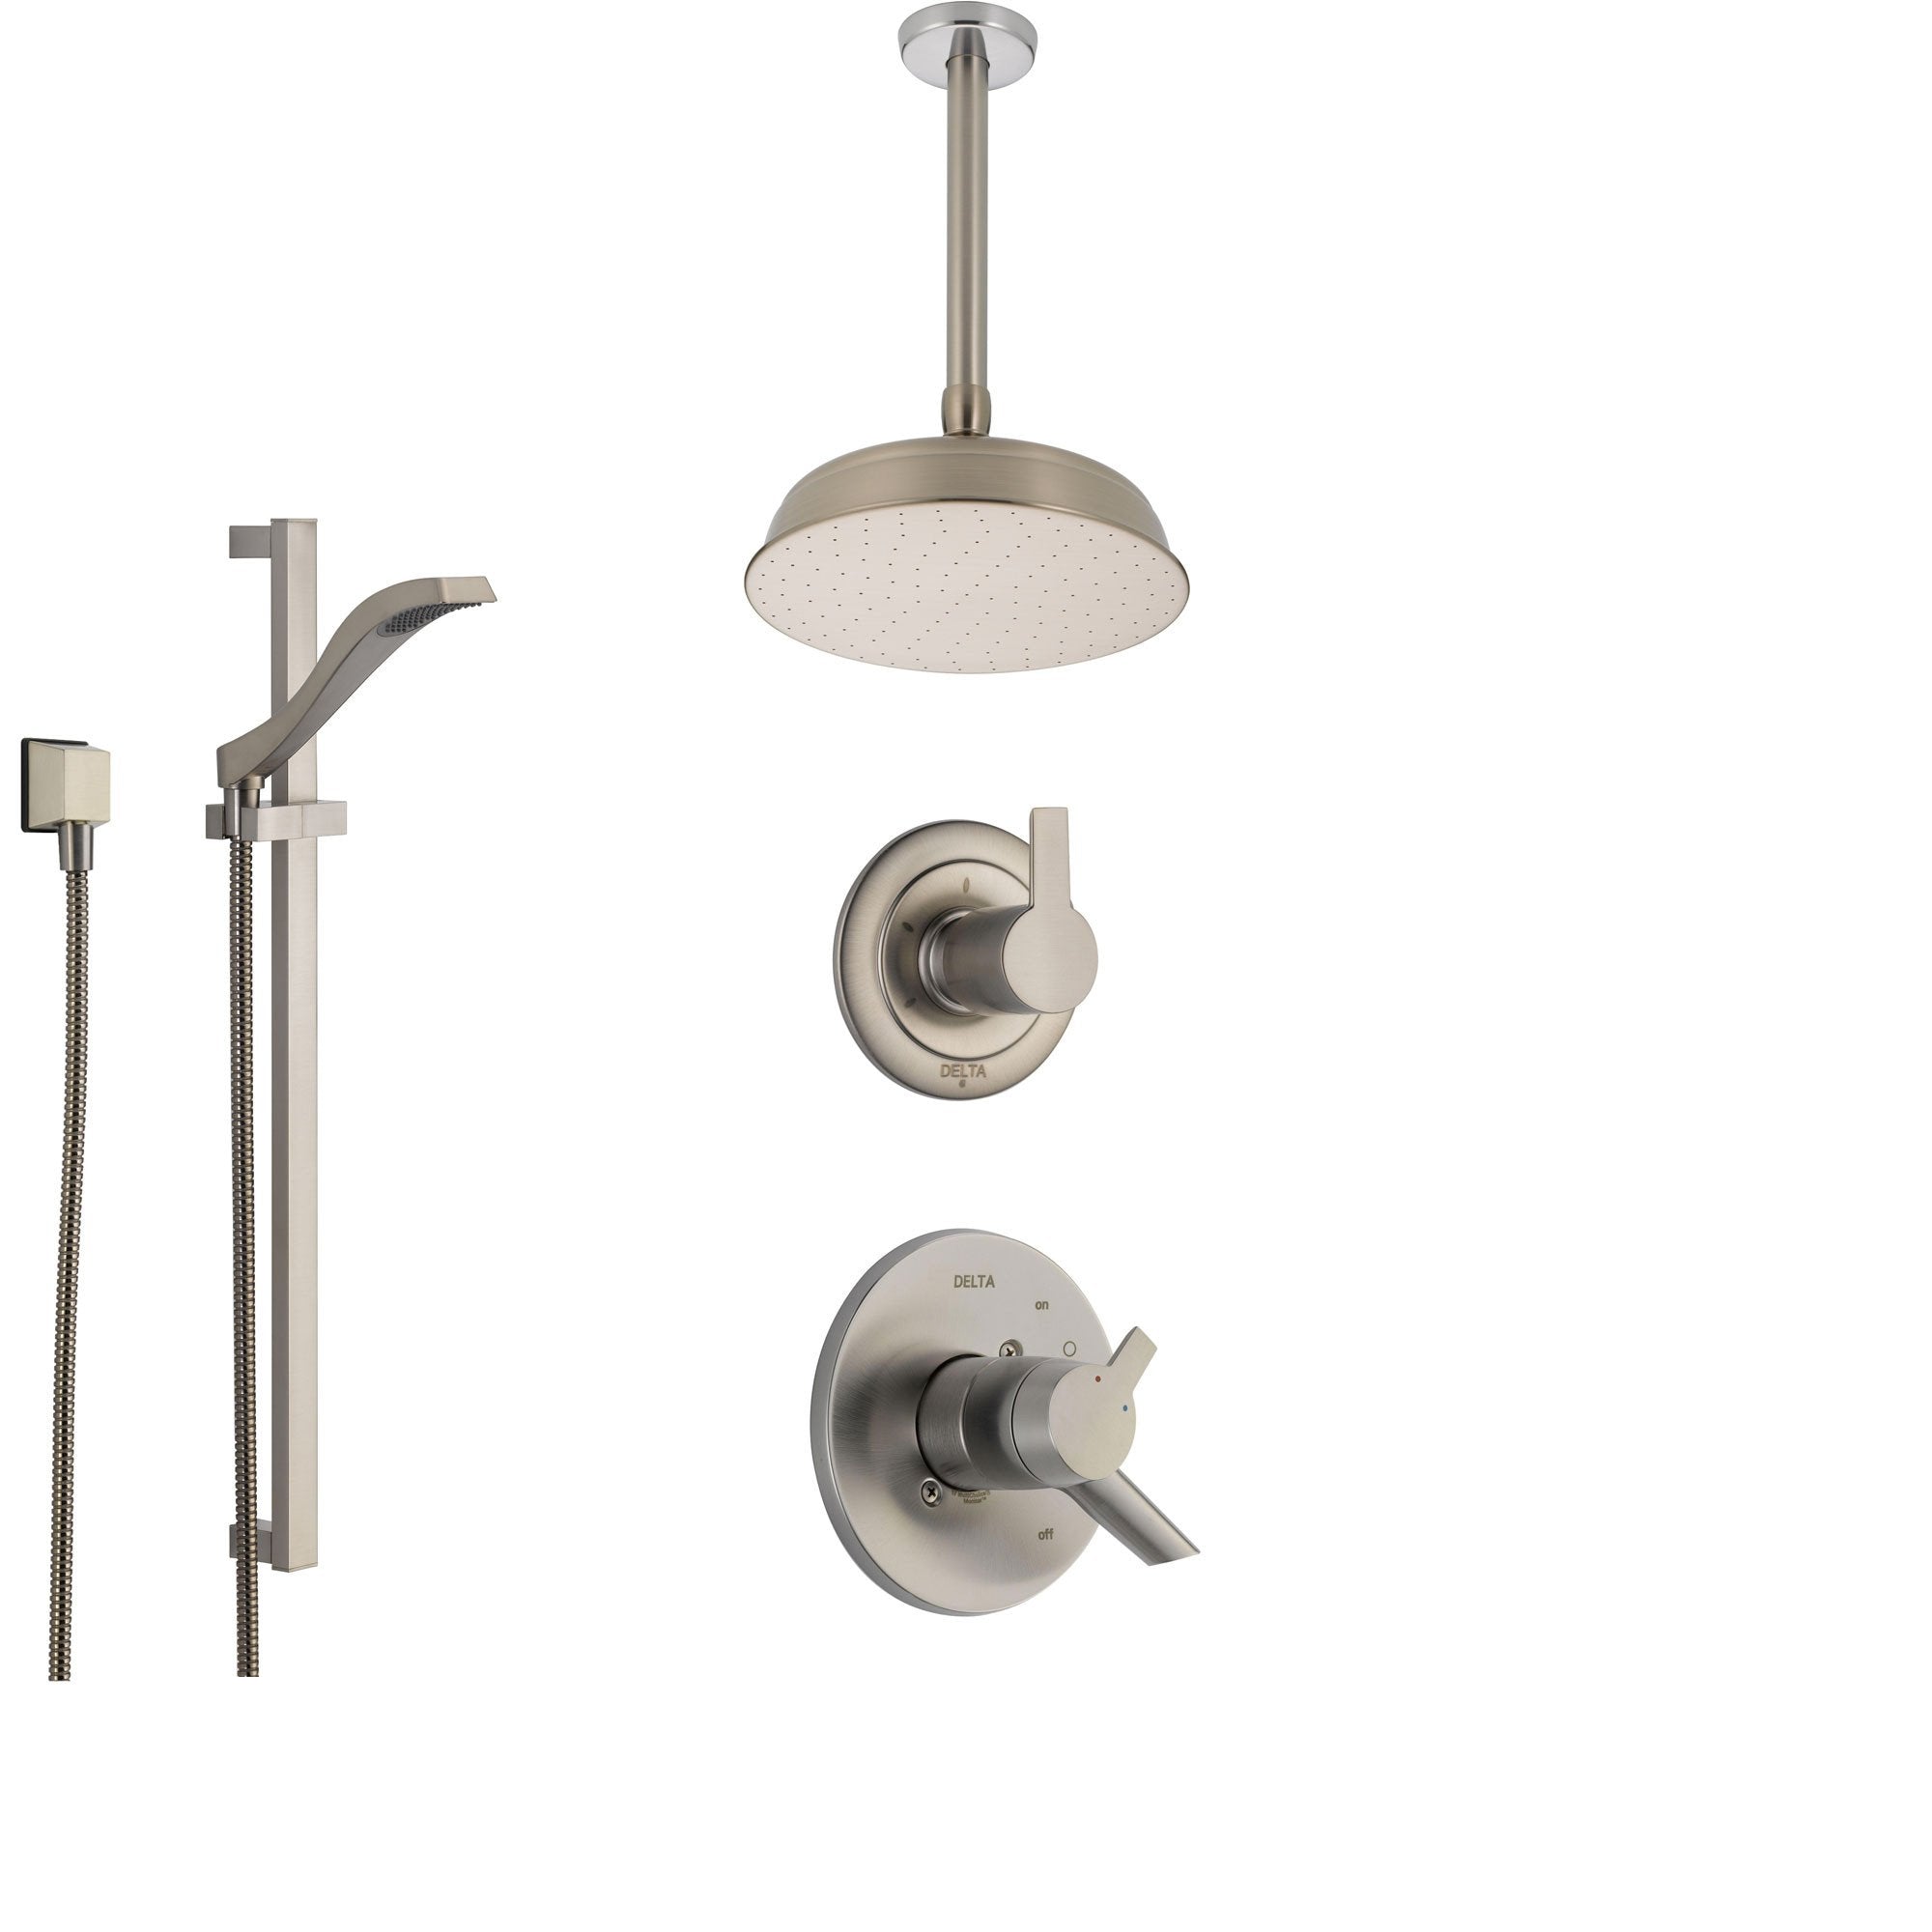 Delta Compel Stainless Steel Shower System with Dual Control Shower Handle, 3-setting Diverter, Large Round Ceiling Mount Showerhead, and Handheld Shower Spray SS176181SS